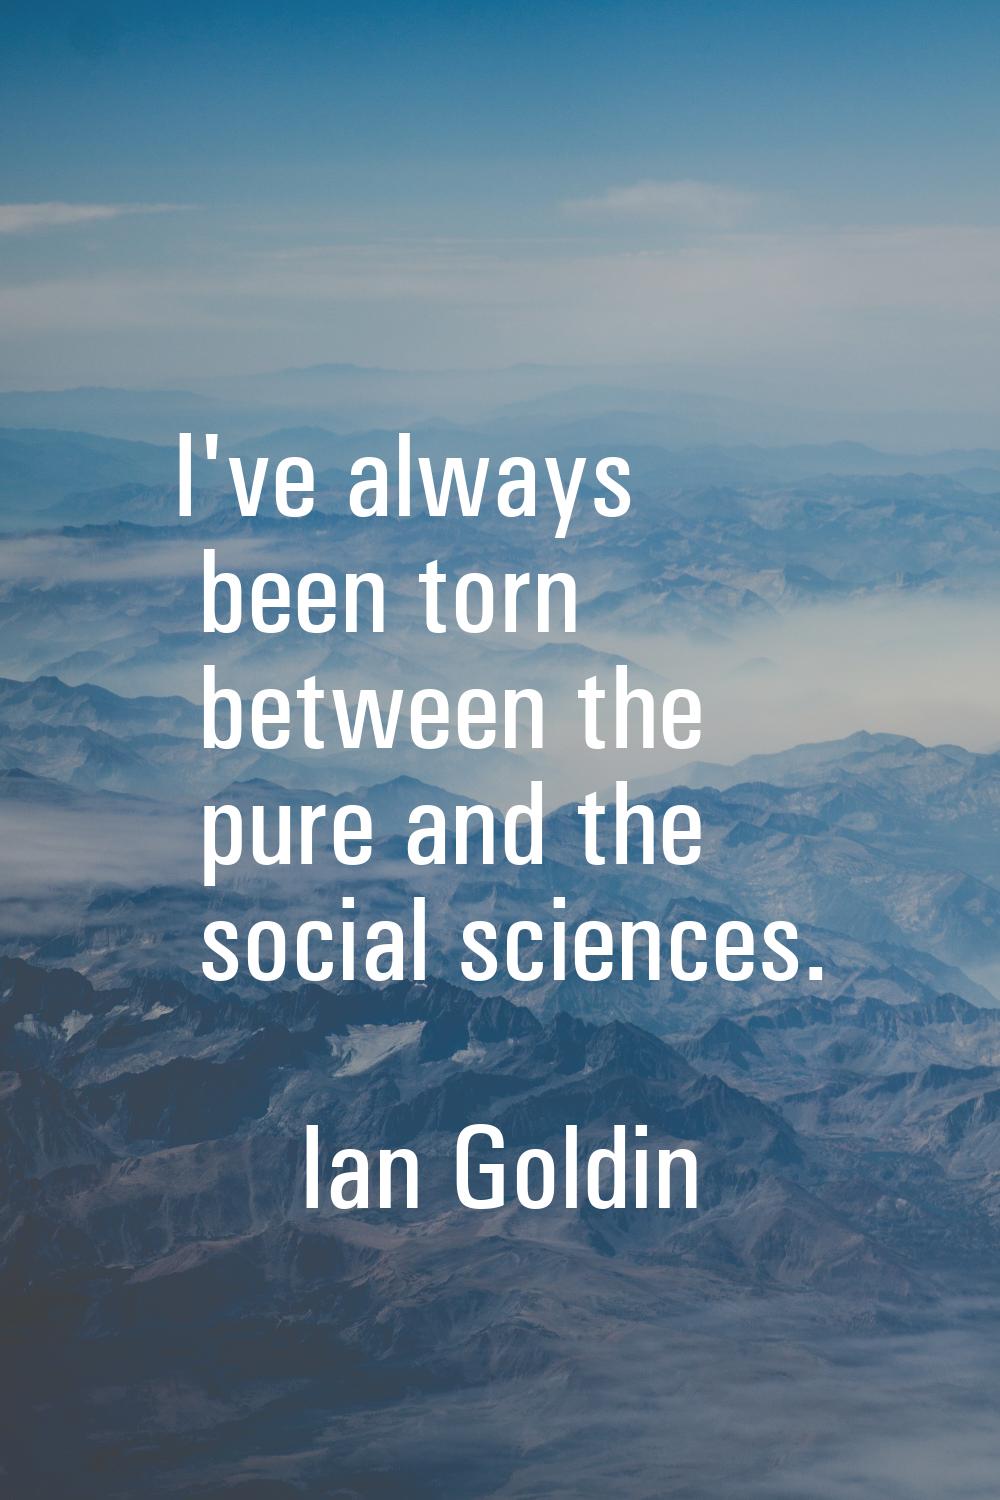 I've always been torn between the pure and the social sciences.